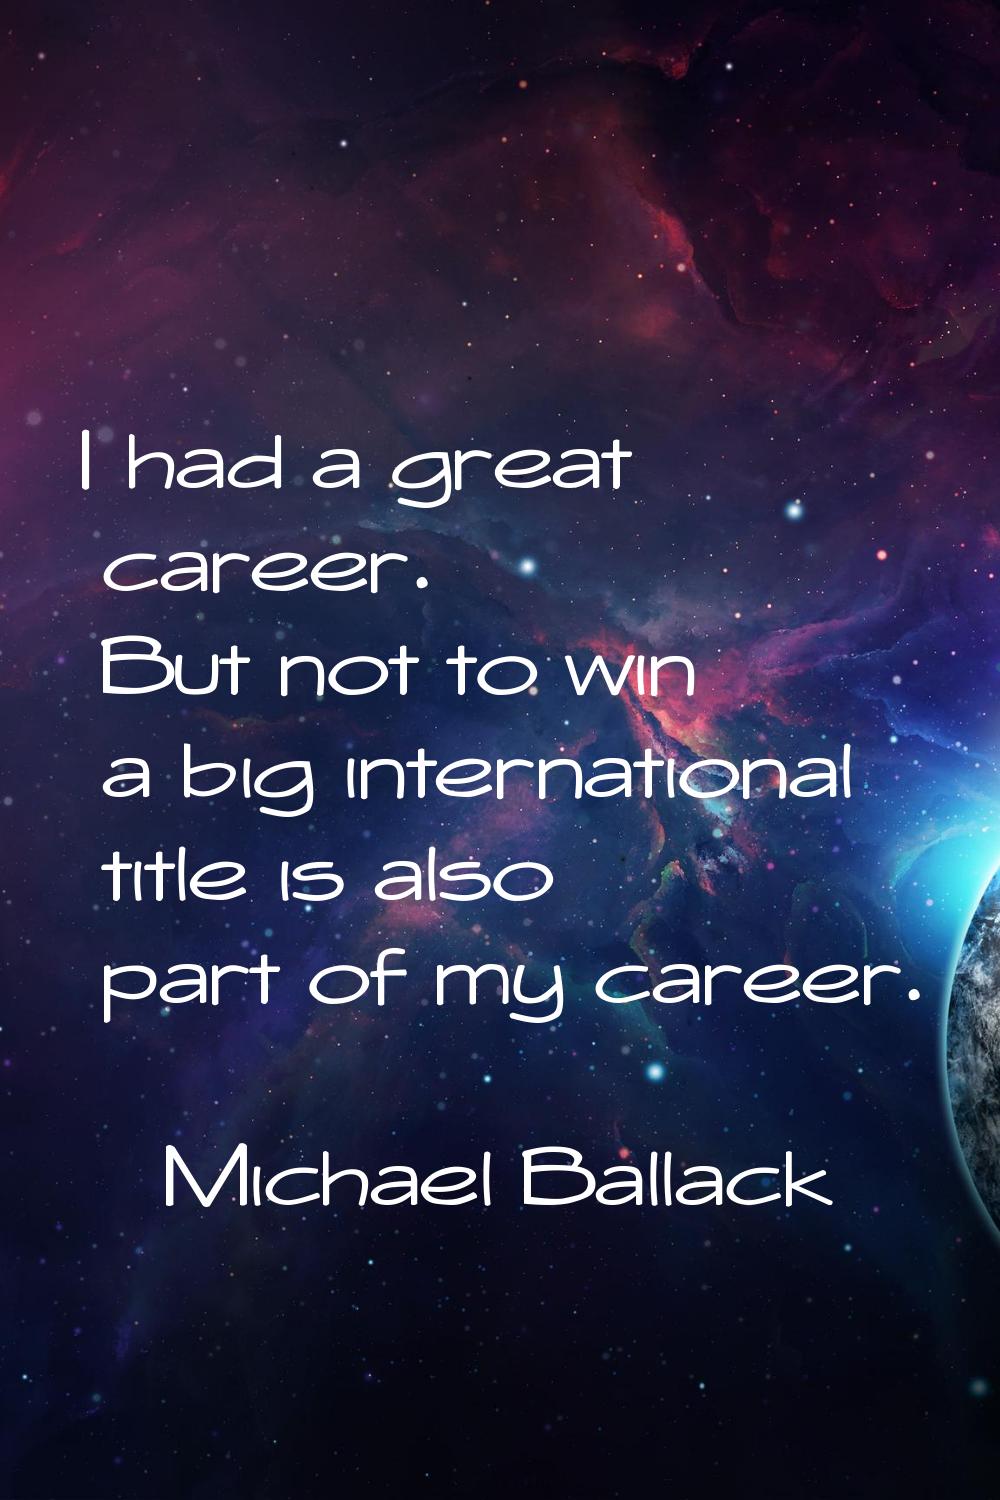 I had a great career. But not to win a big international title is also part of my career.